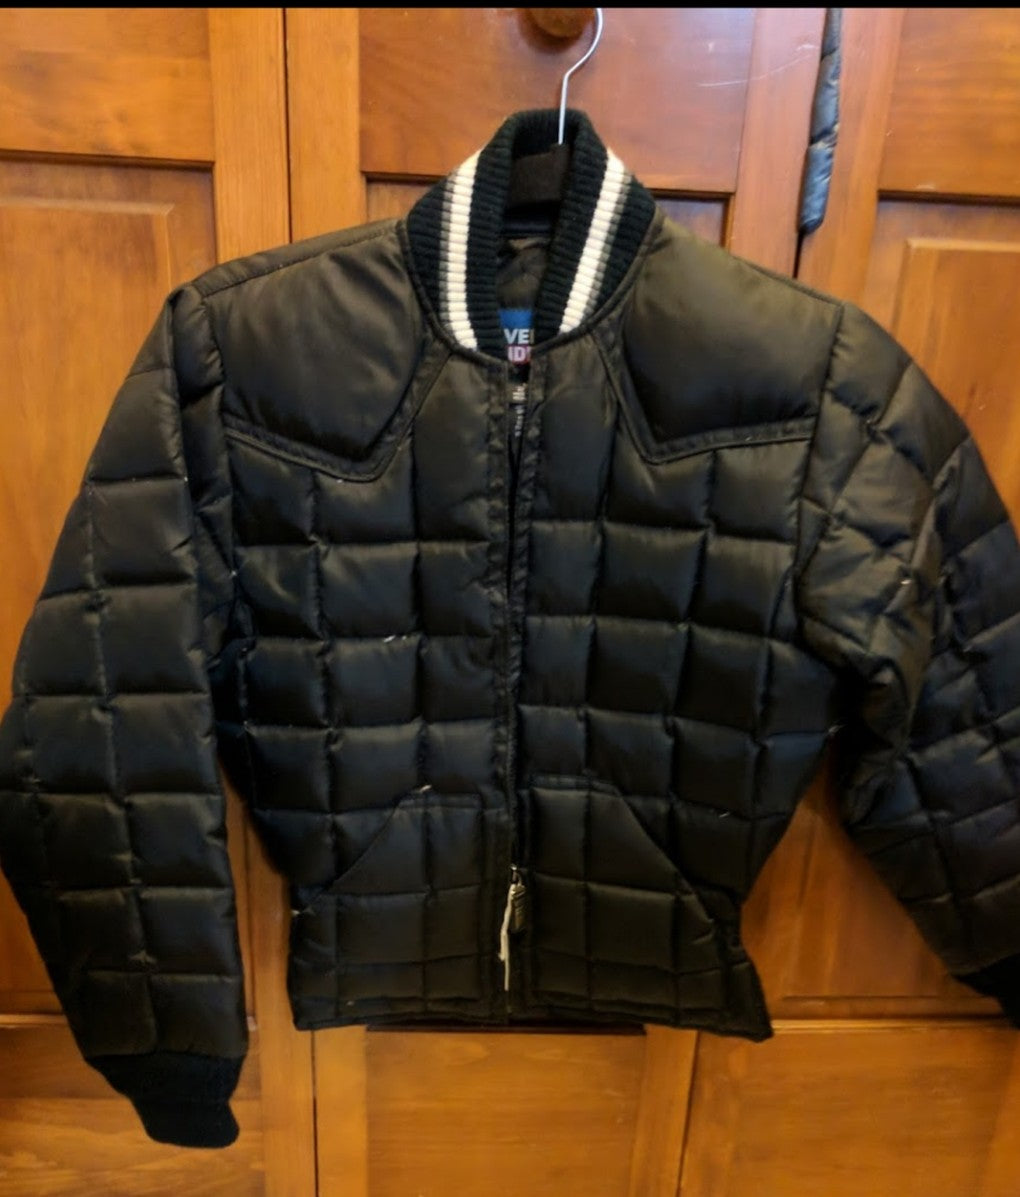 Silver Ryder Youth size 10/12 Down Jacket Like New!